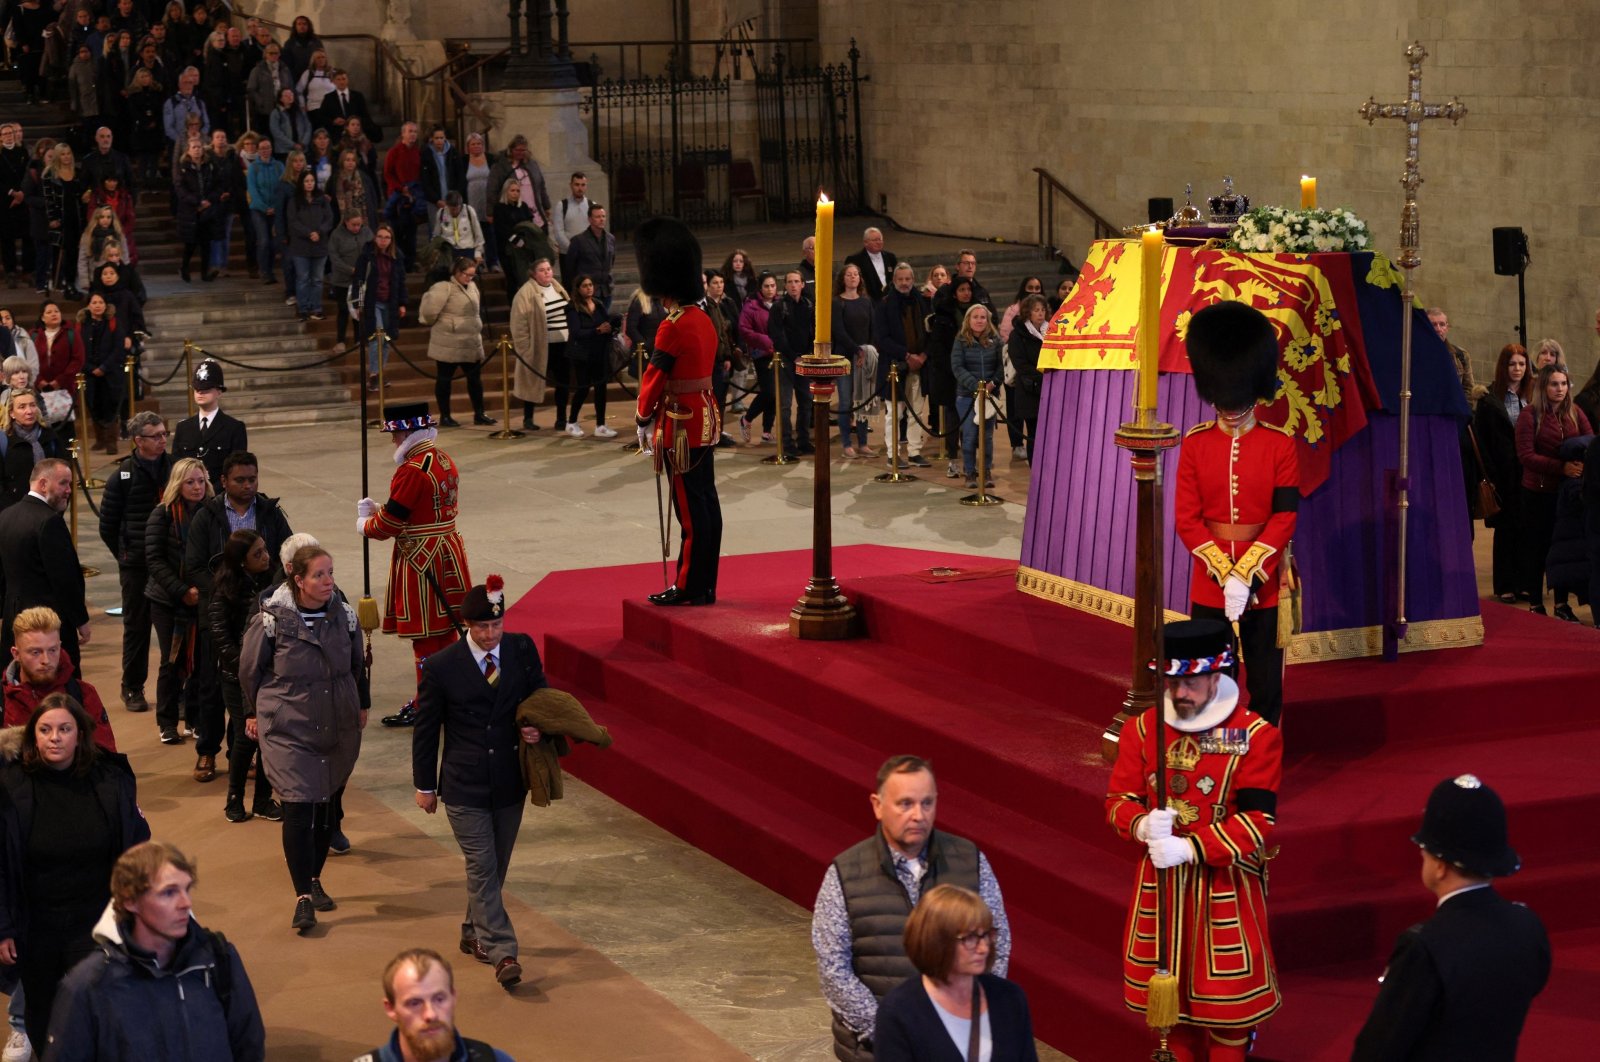 Members of the public pay their respects as they pass the coffin of Queen Elizabeth II, lying in state inside Westminster Hall, at the Palace of Westminster in London, Britain, Sept. 18, 2022. (AFP Photo)